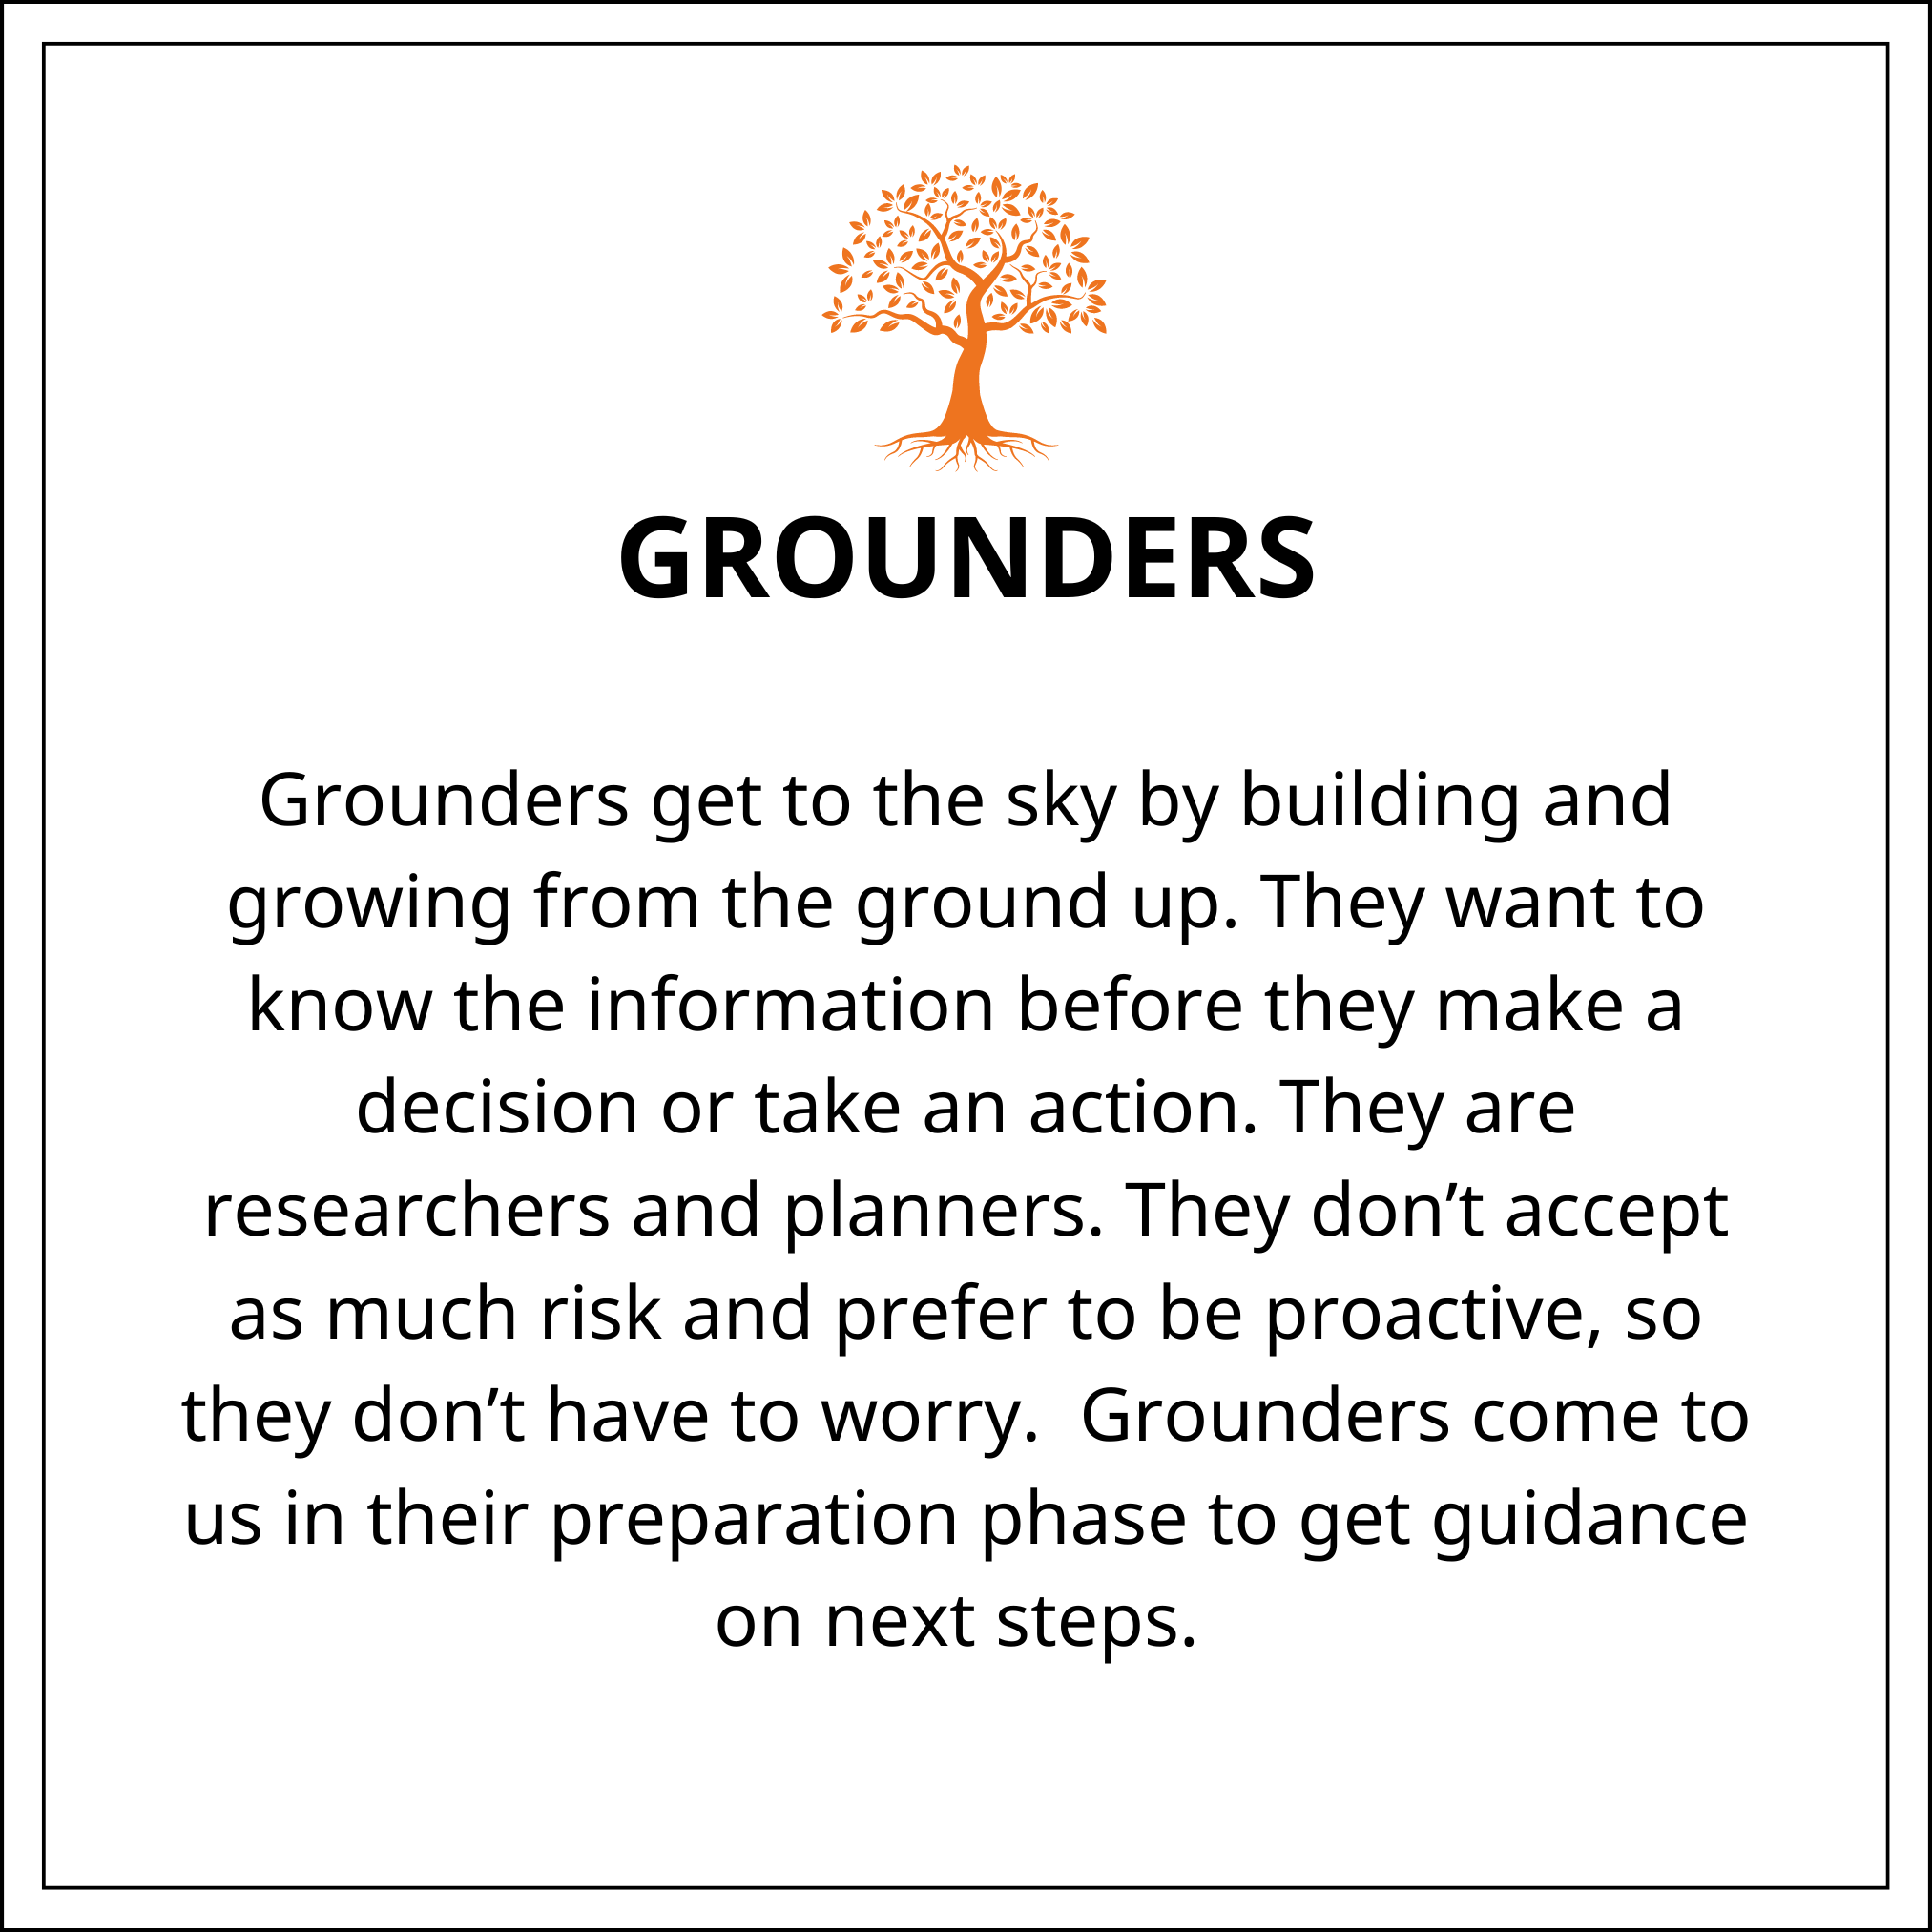 Are you a grounder?